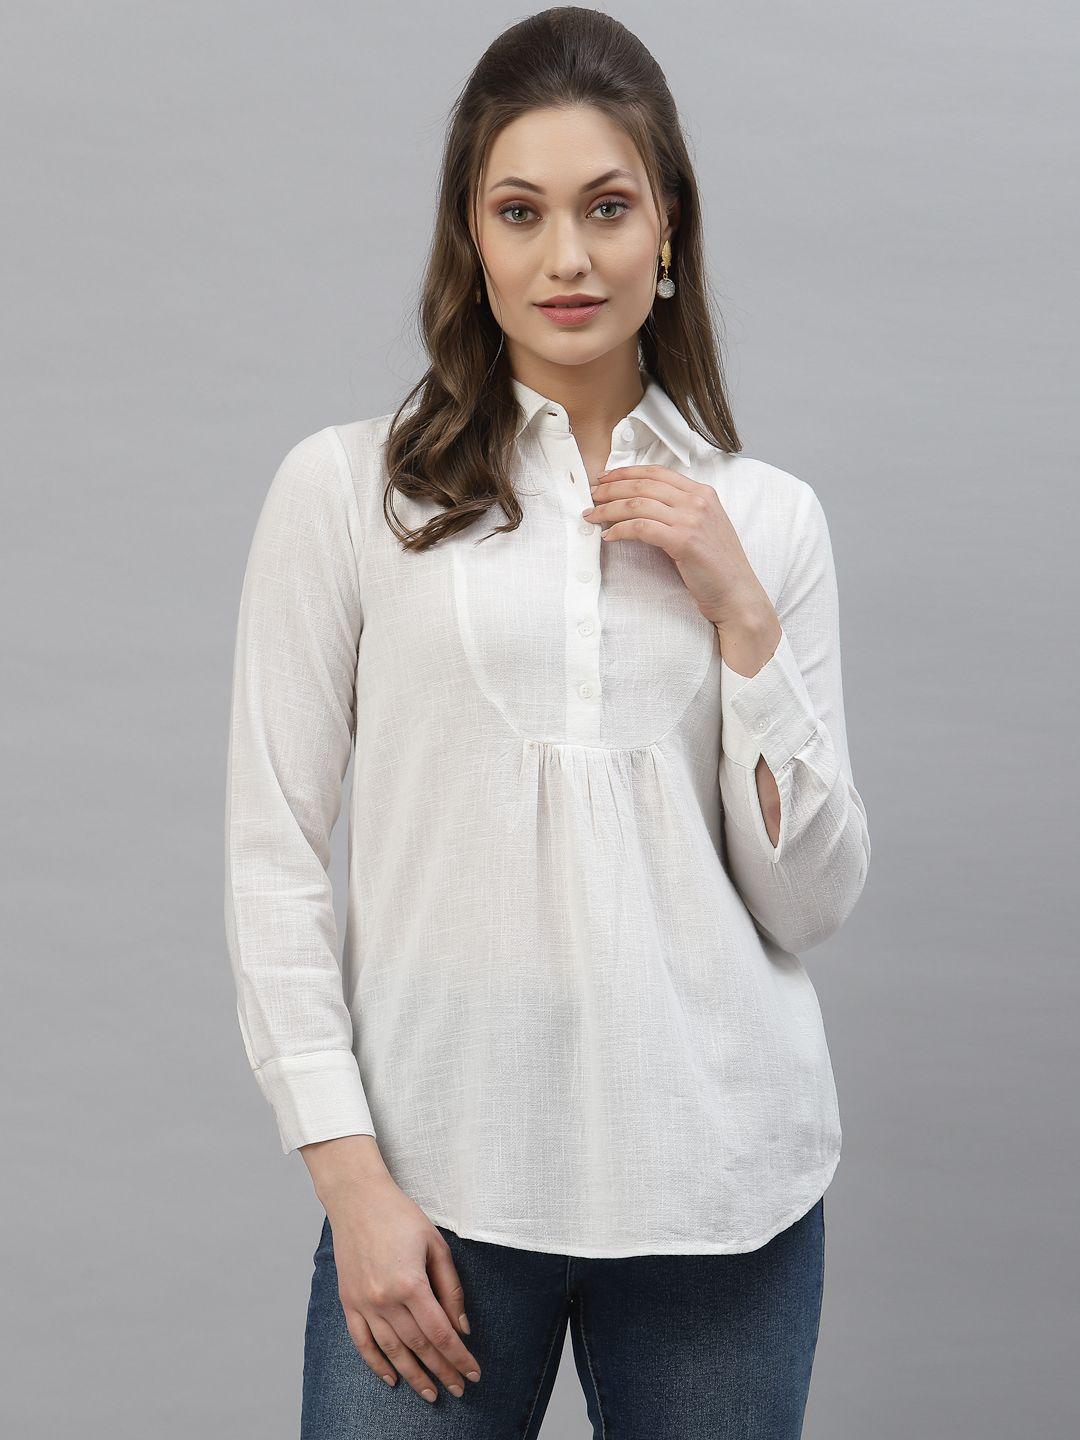 mode by red tape off white shirt style top